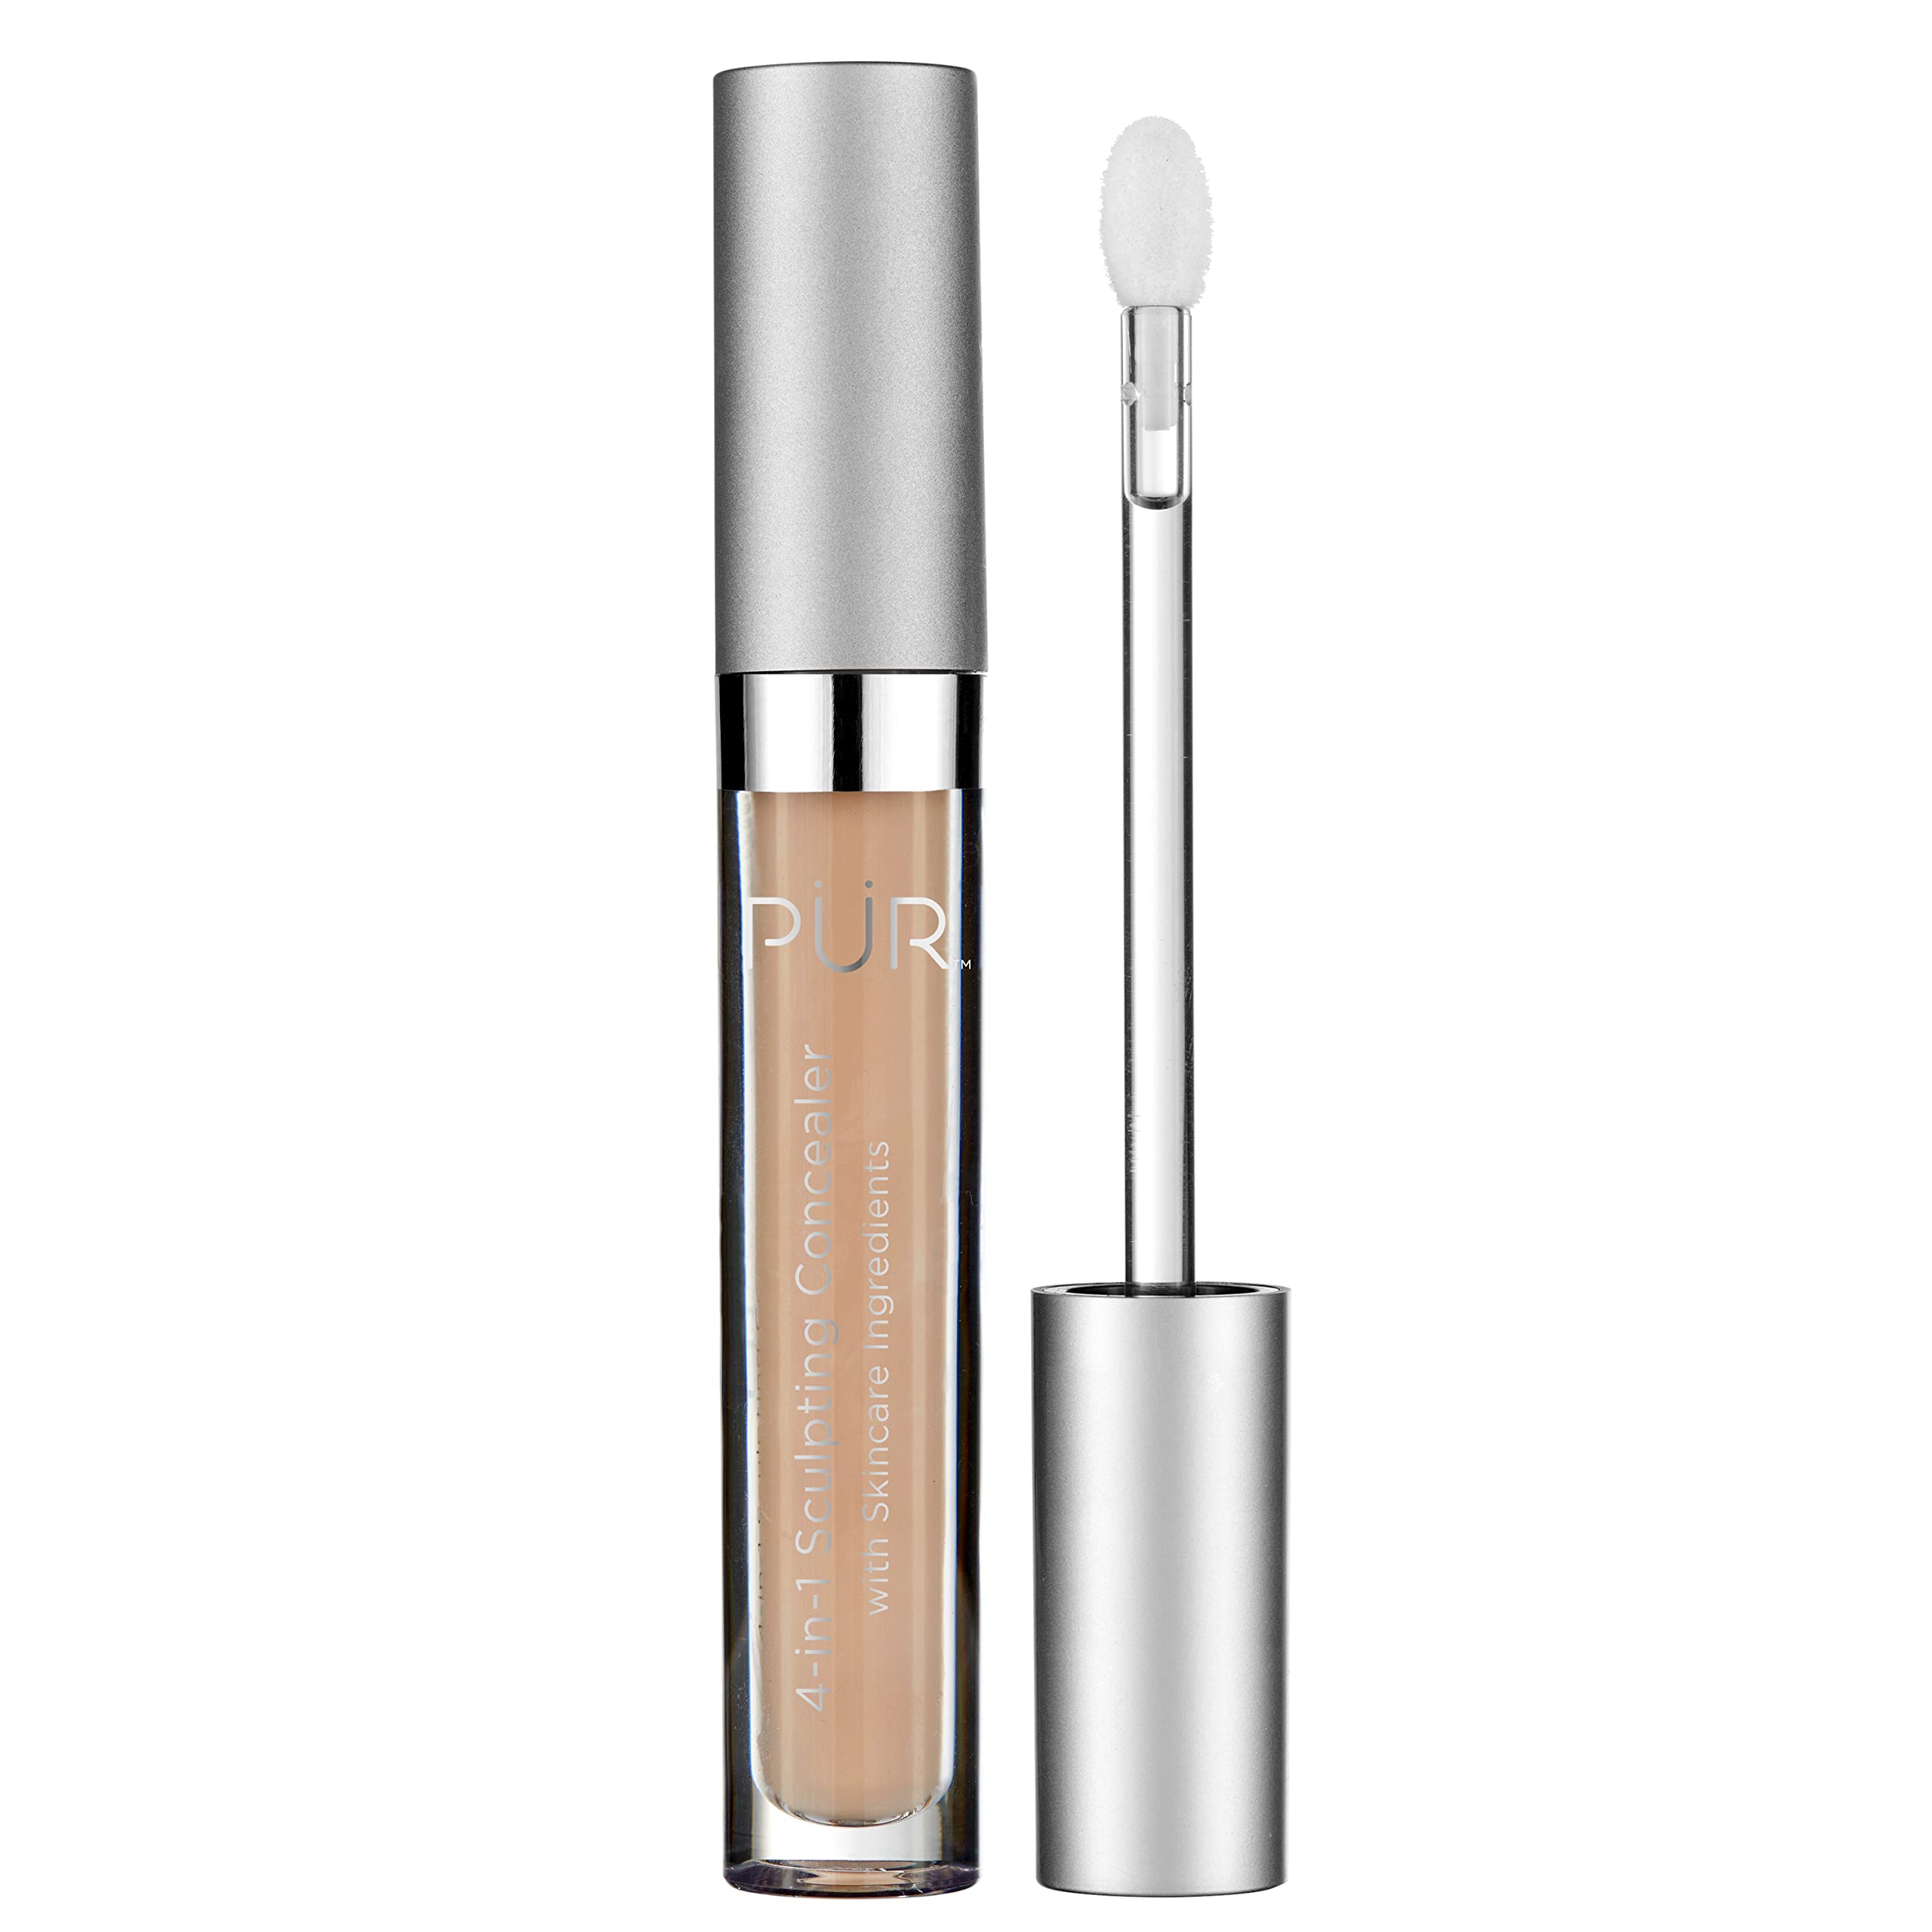 PÜR 4-in-1 Sculpting Concealer, Moisturizing Formula, Covers Imperfections, Lightweight medium to full coverage, Revitalizes Complexion, Cruelty-Free, Gluten Free